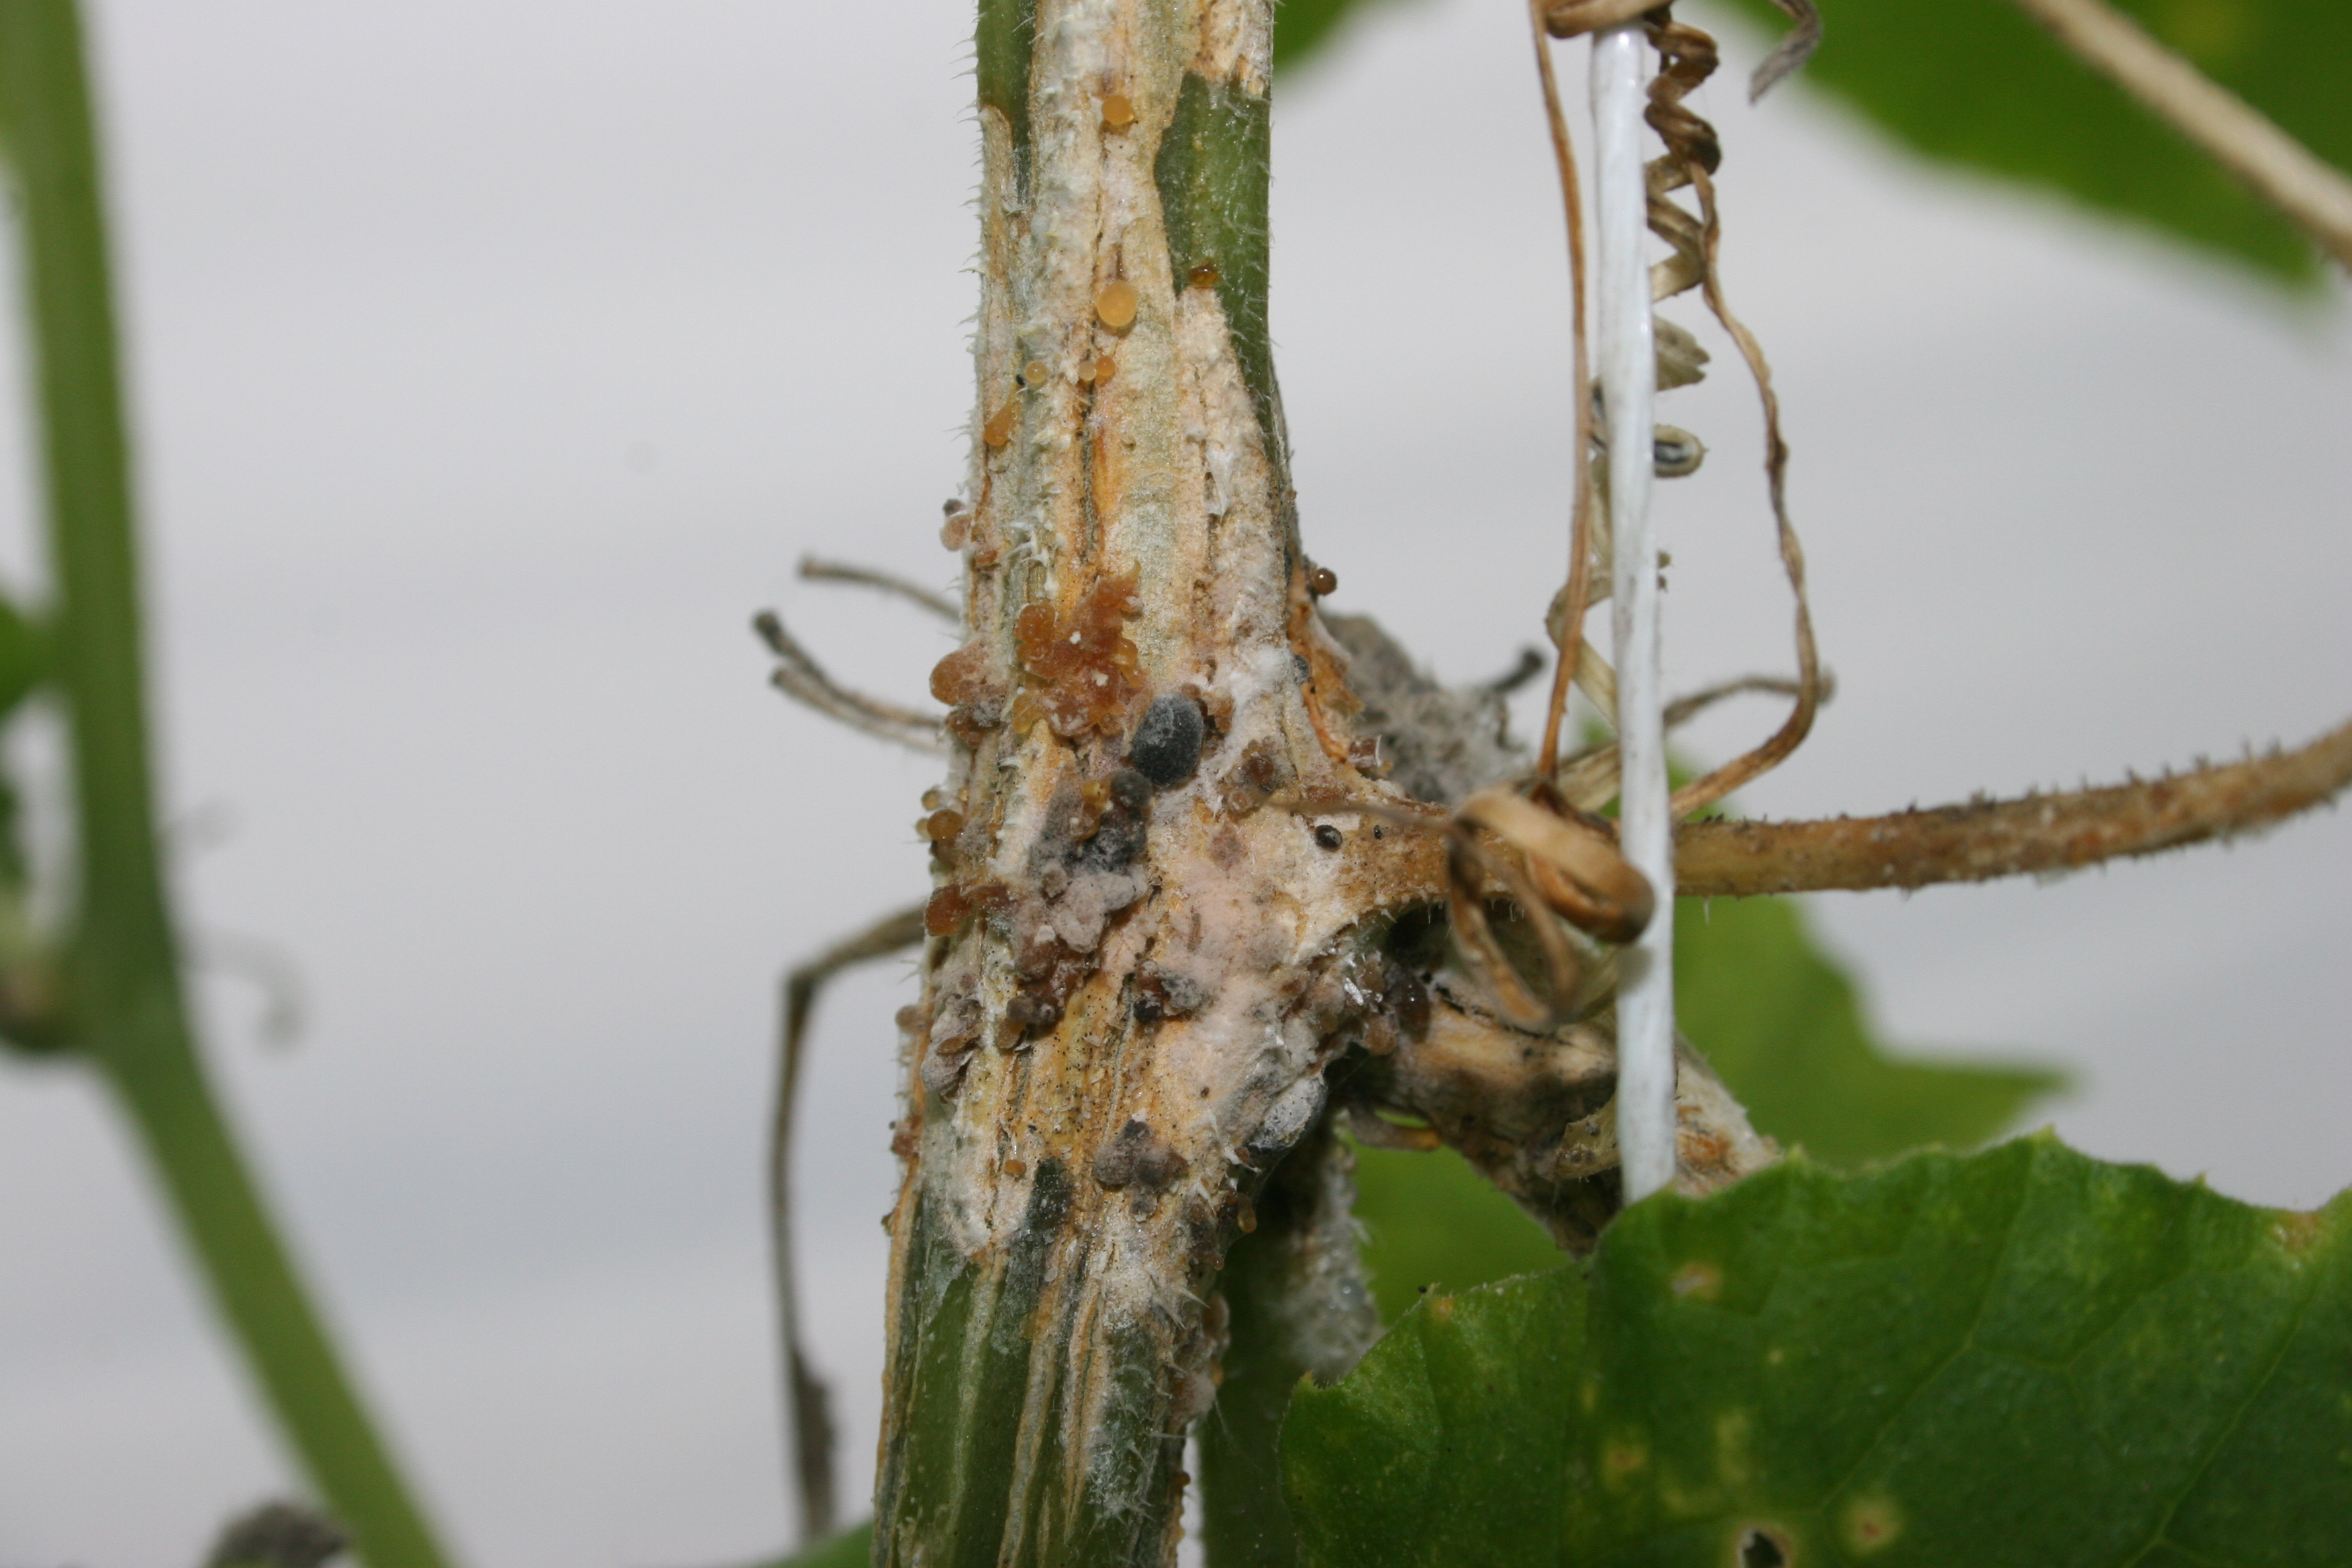 Sclerotinia white mold/timber rot on trellised cucumber.